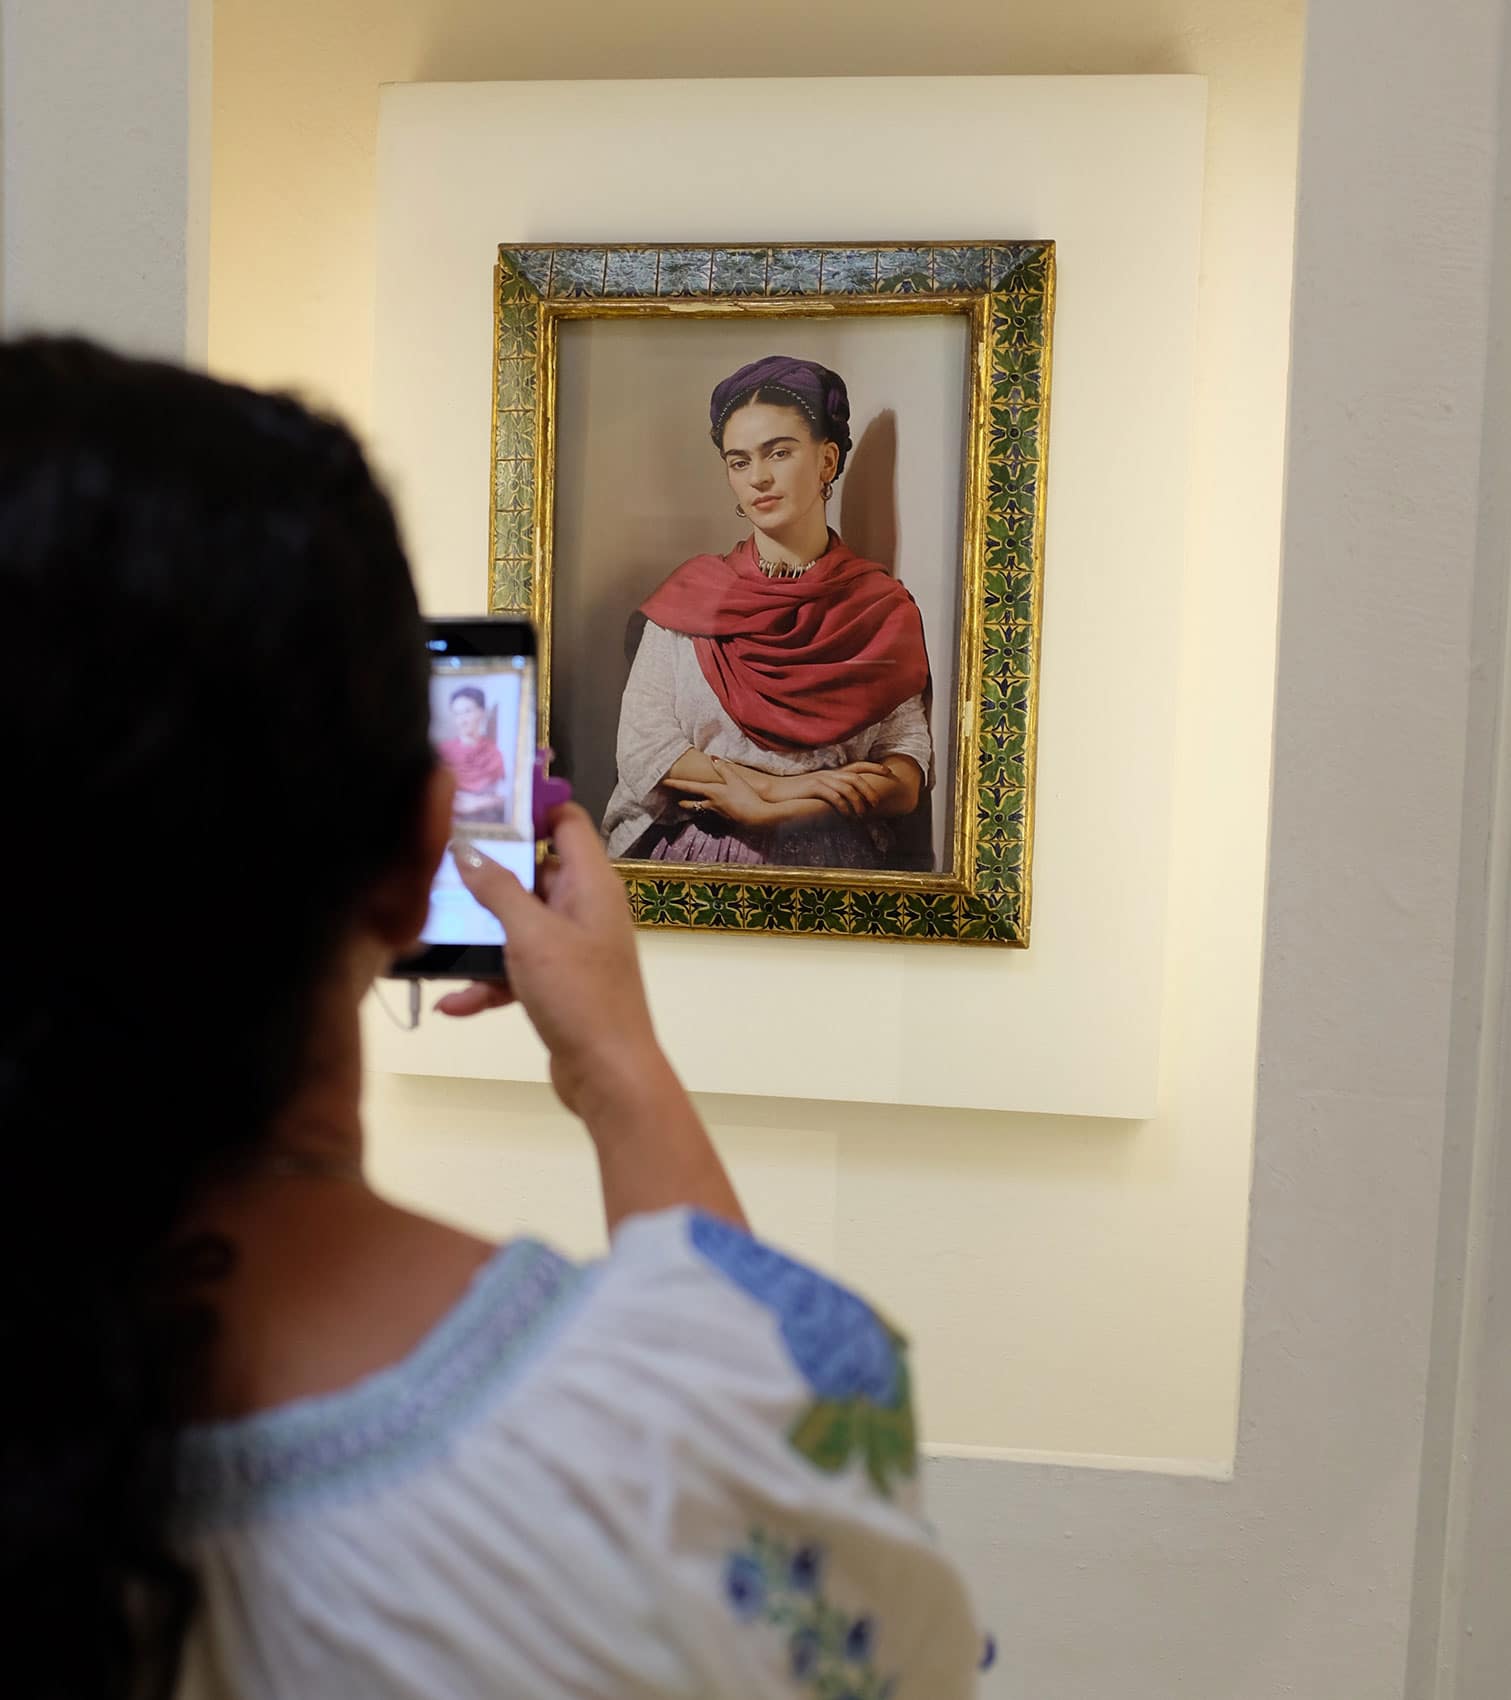 Frida Kahlo painting in Mexico